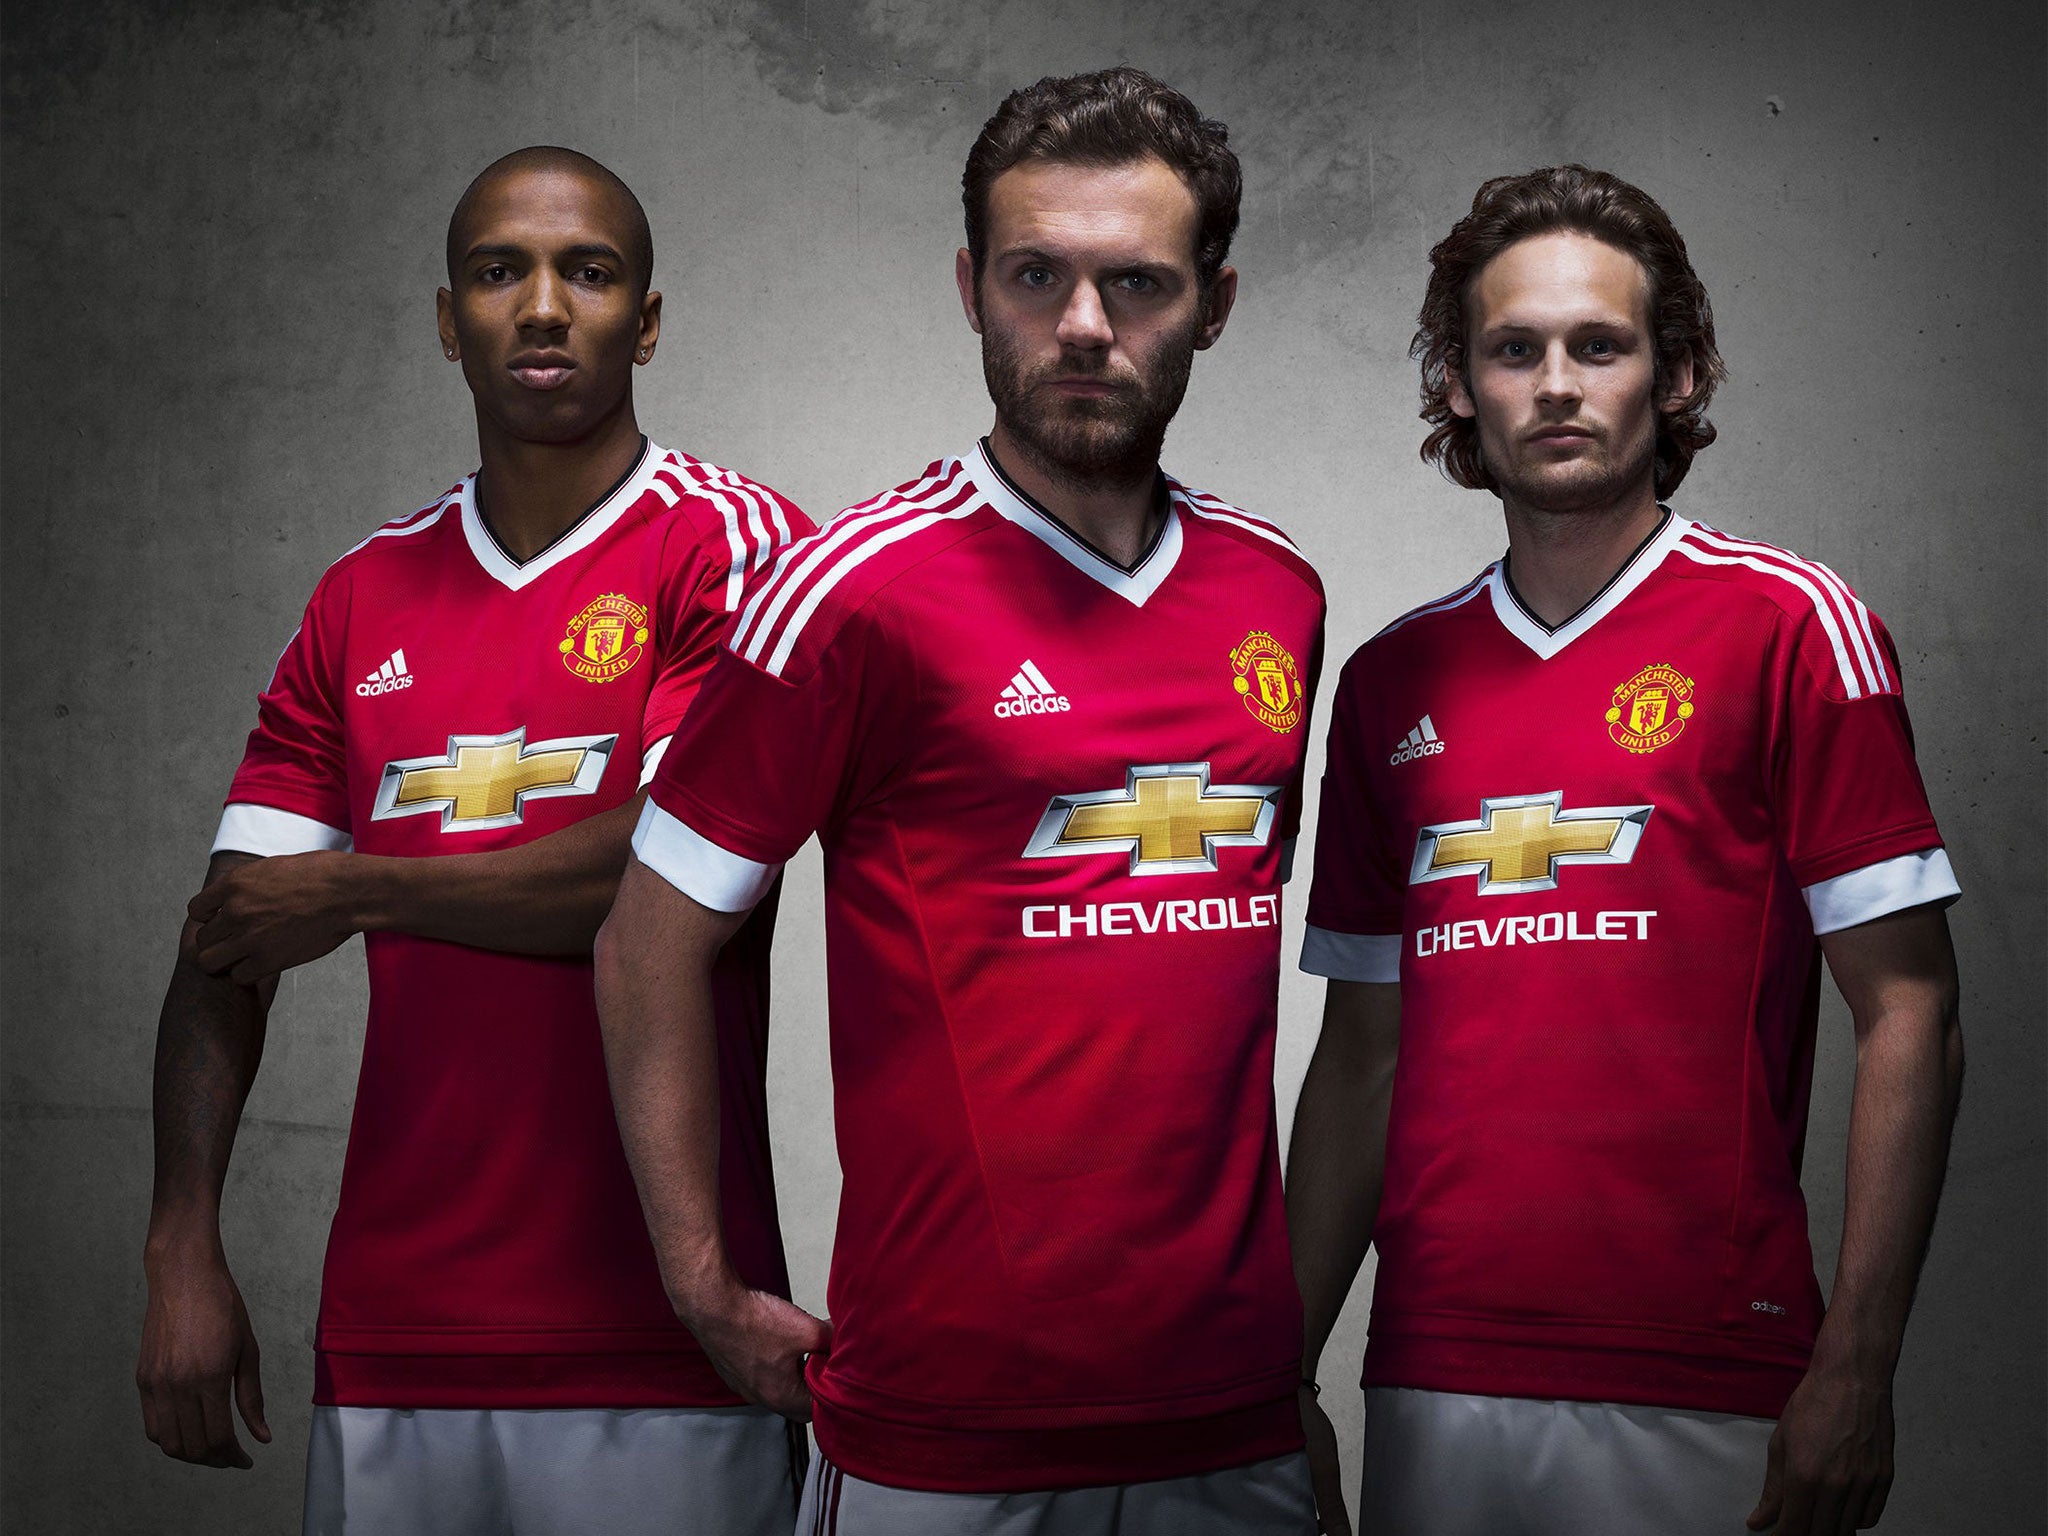 Manchester United 2015/16 kit unveiled Morgan Schneiderlin leads the Adidas campaign as new shirt is launched The Independent The Independent photo